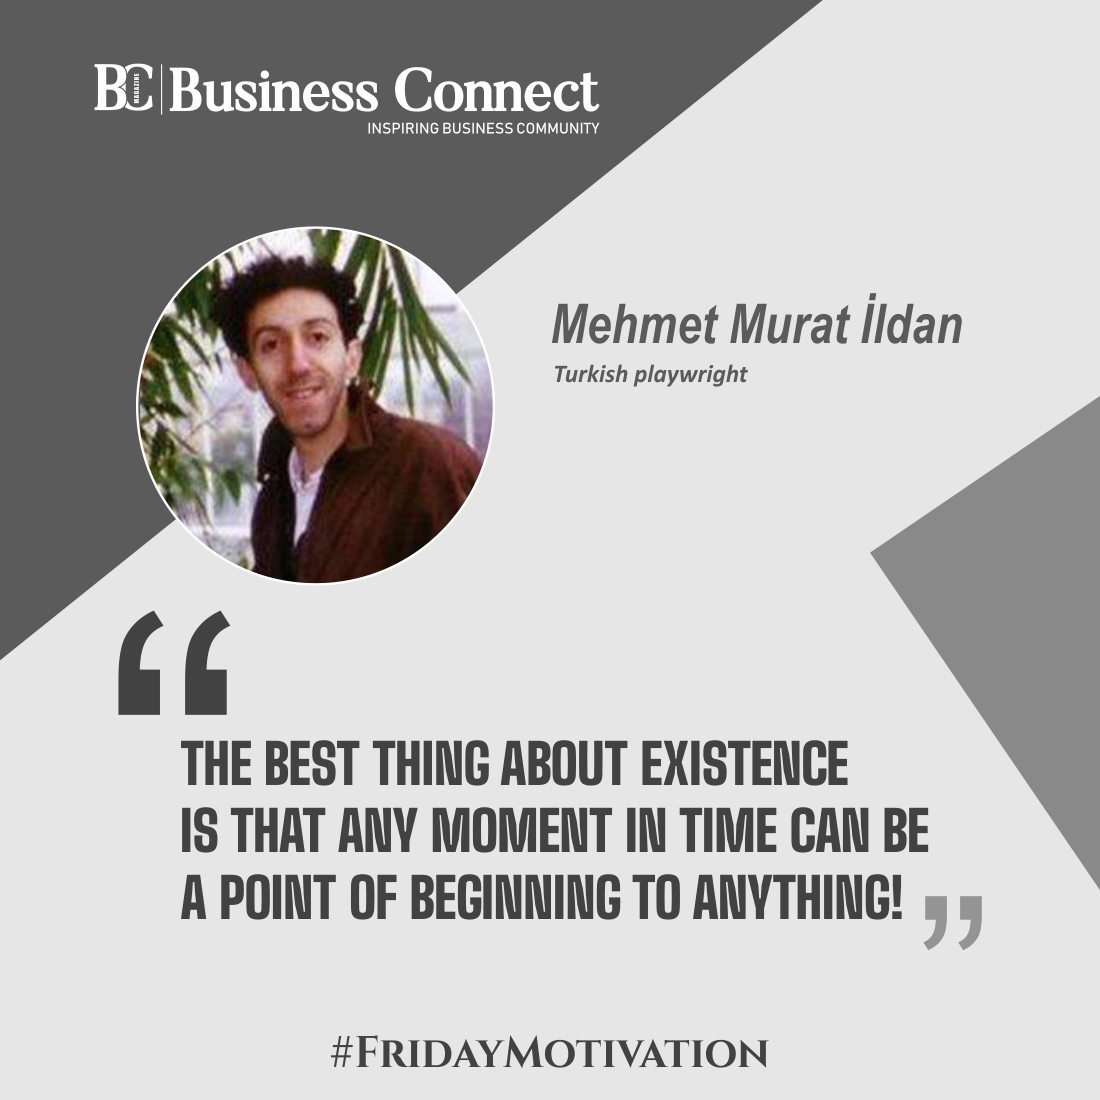 'The best thing about existence is that any moment in time can be a point of beginning to anything!'- Mehmet Murat Ildan

#MehmetMuratIldan #quote #quotes #friday #morning #today #morningvibe #quotesoftheday #quotesdaily #motivationquote #todayquote #motivationdaily #motivaton